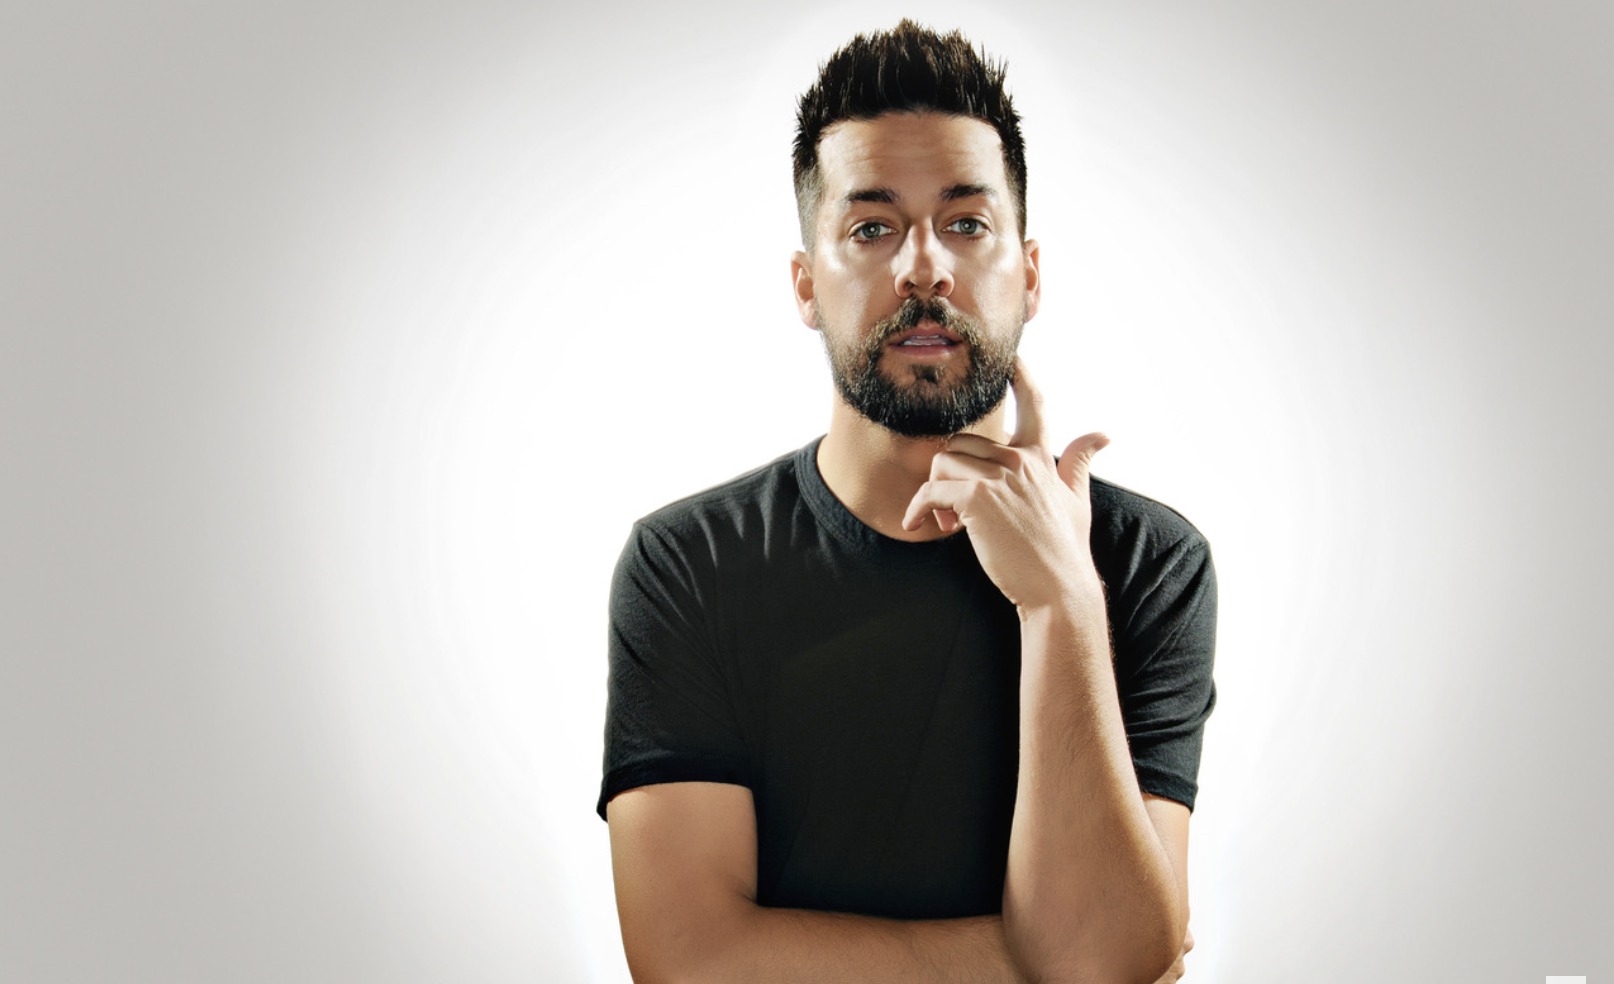 John Crist gets candid on love for Church, public cancellation